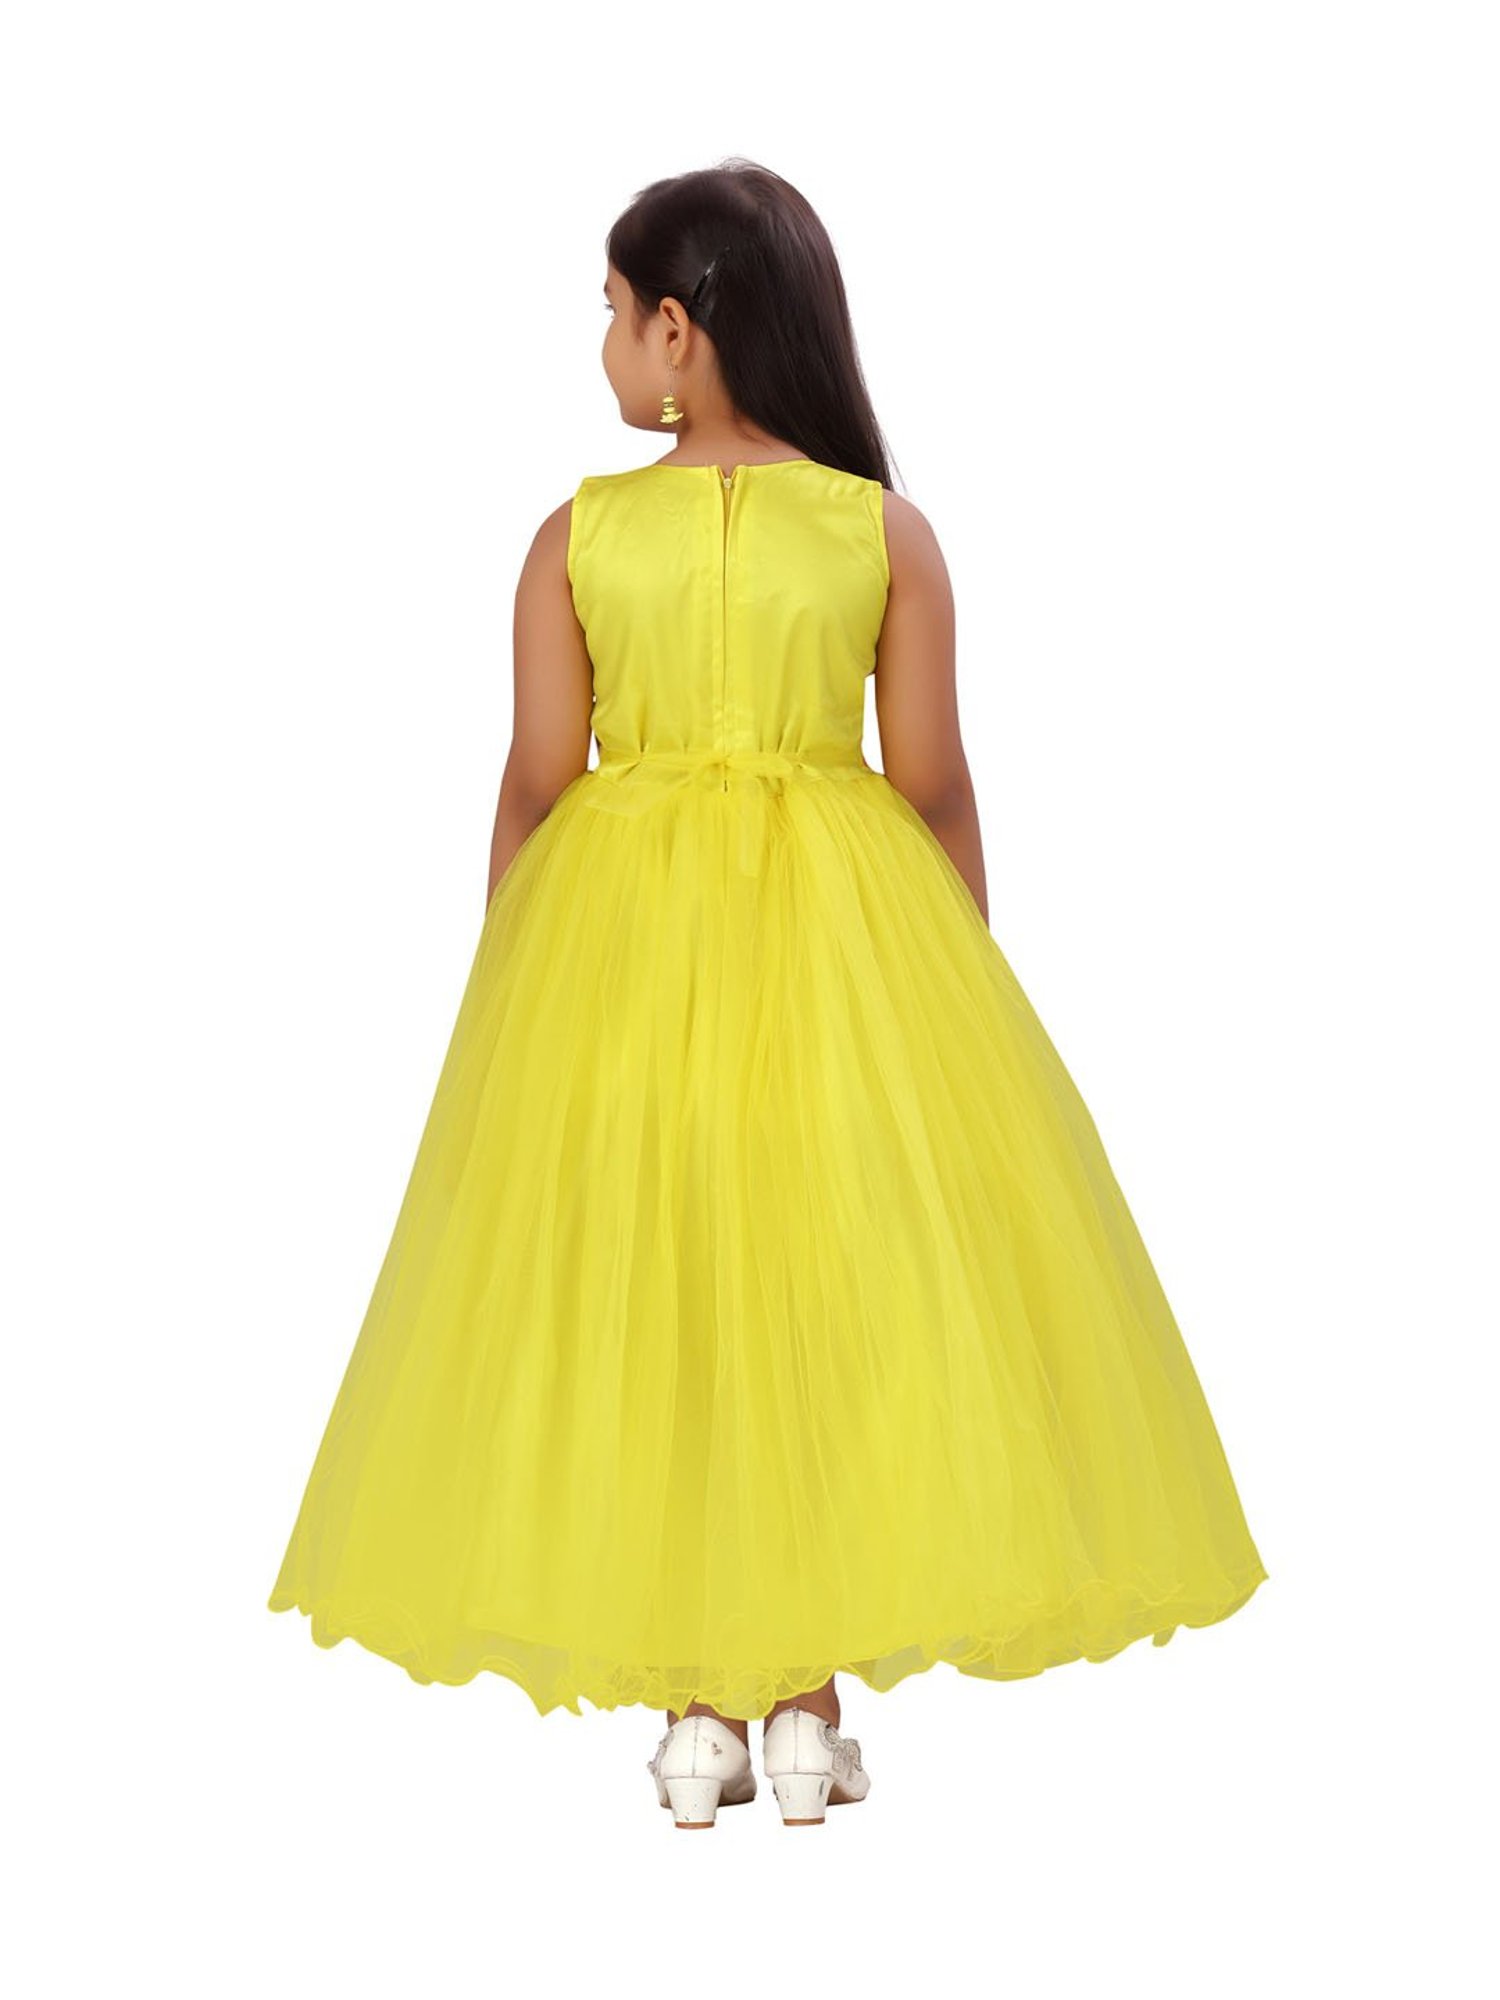 Net Kids Designer YELLOW Gown at Rs 599 in Faridabad | ID: 2850453002548